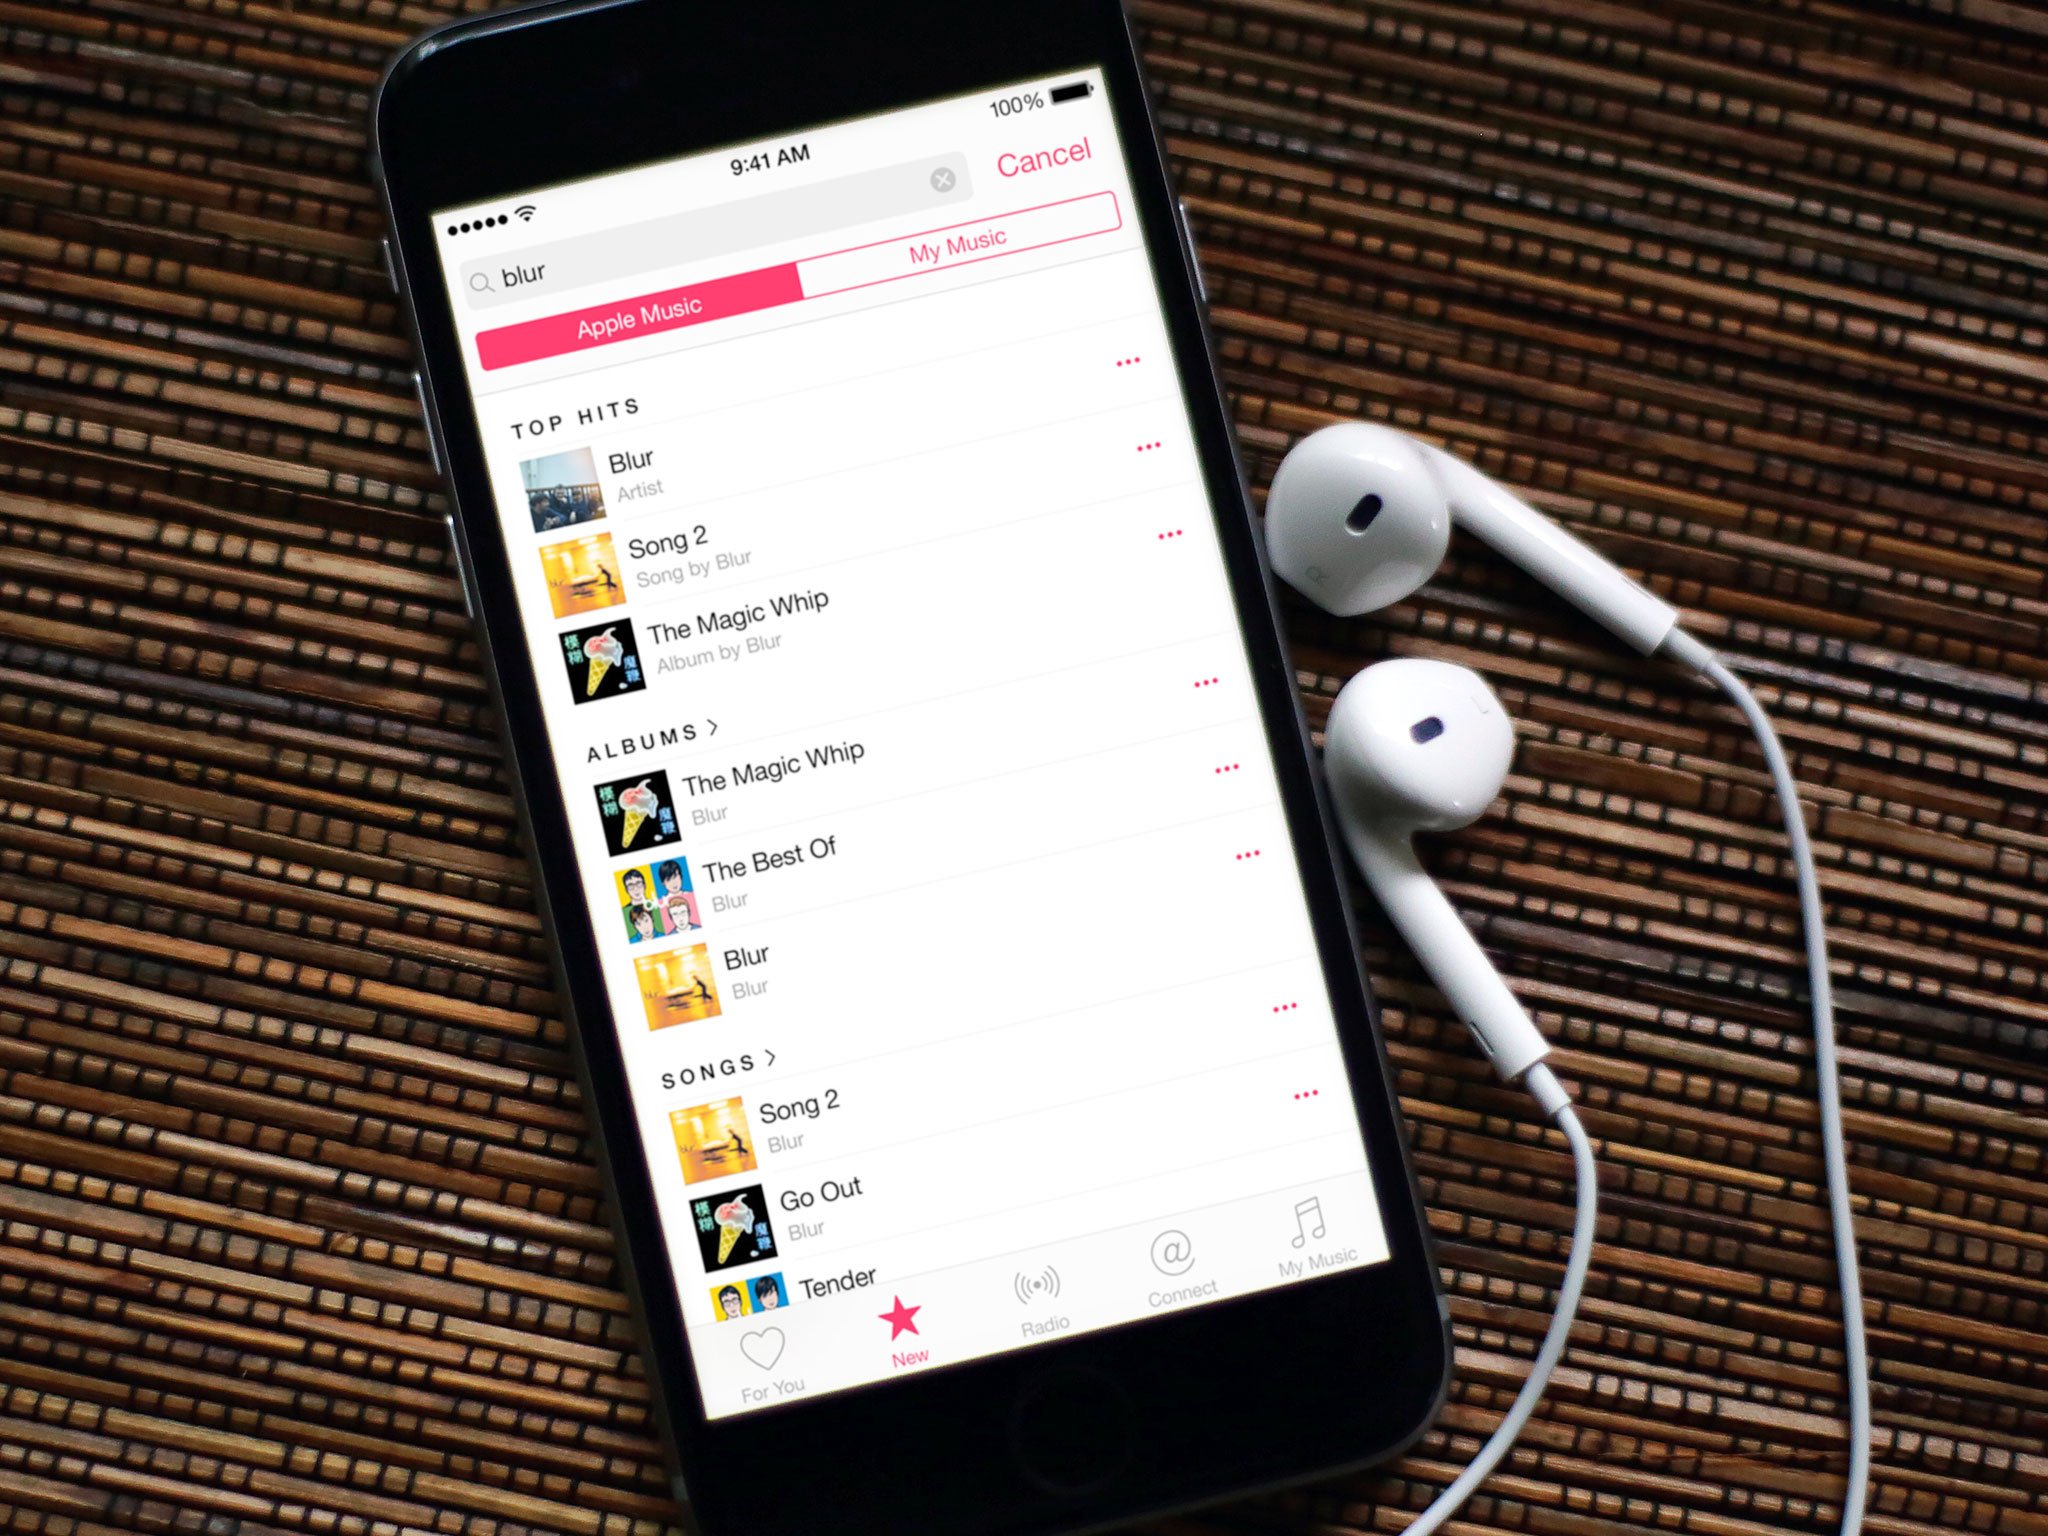 Apple rolling out improved iTunes Match for Apple Music subscribers